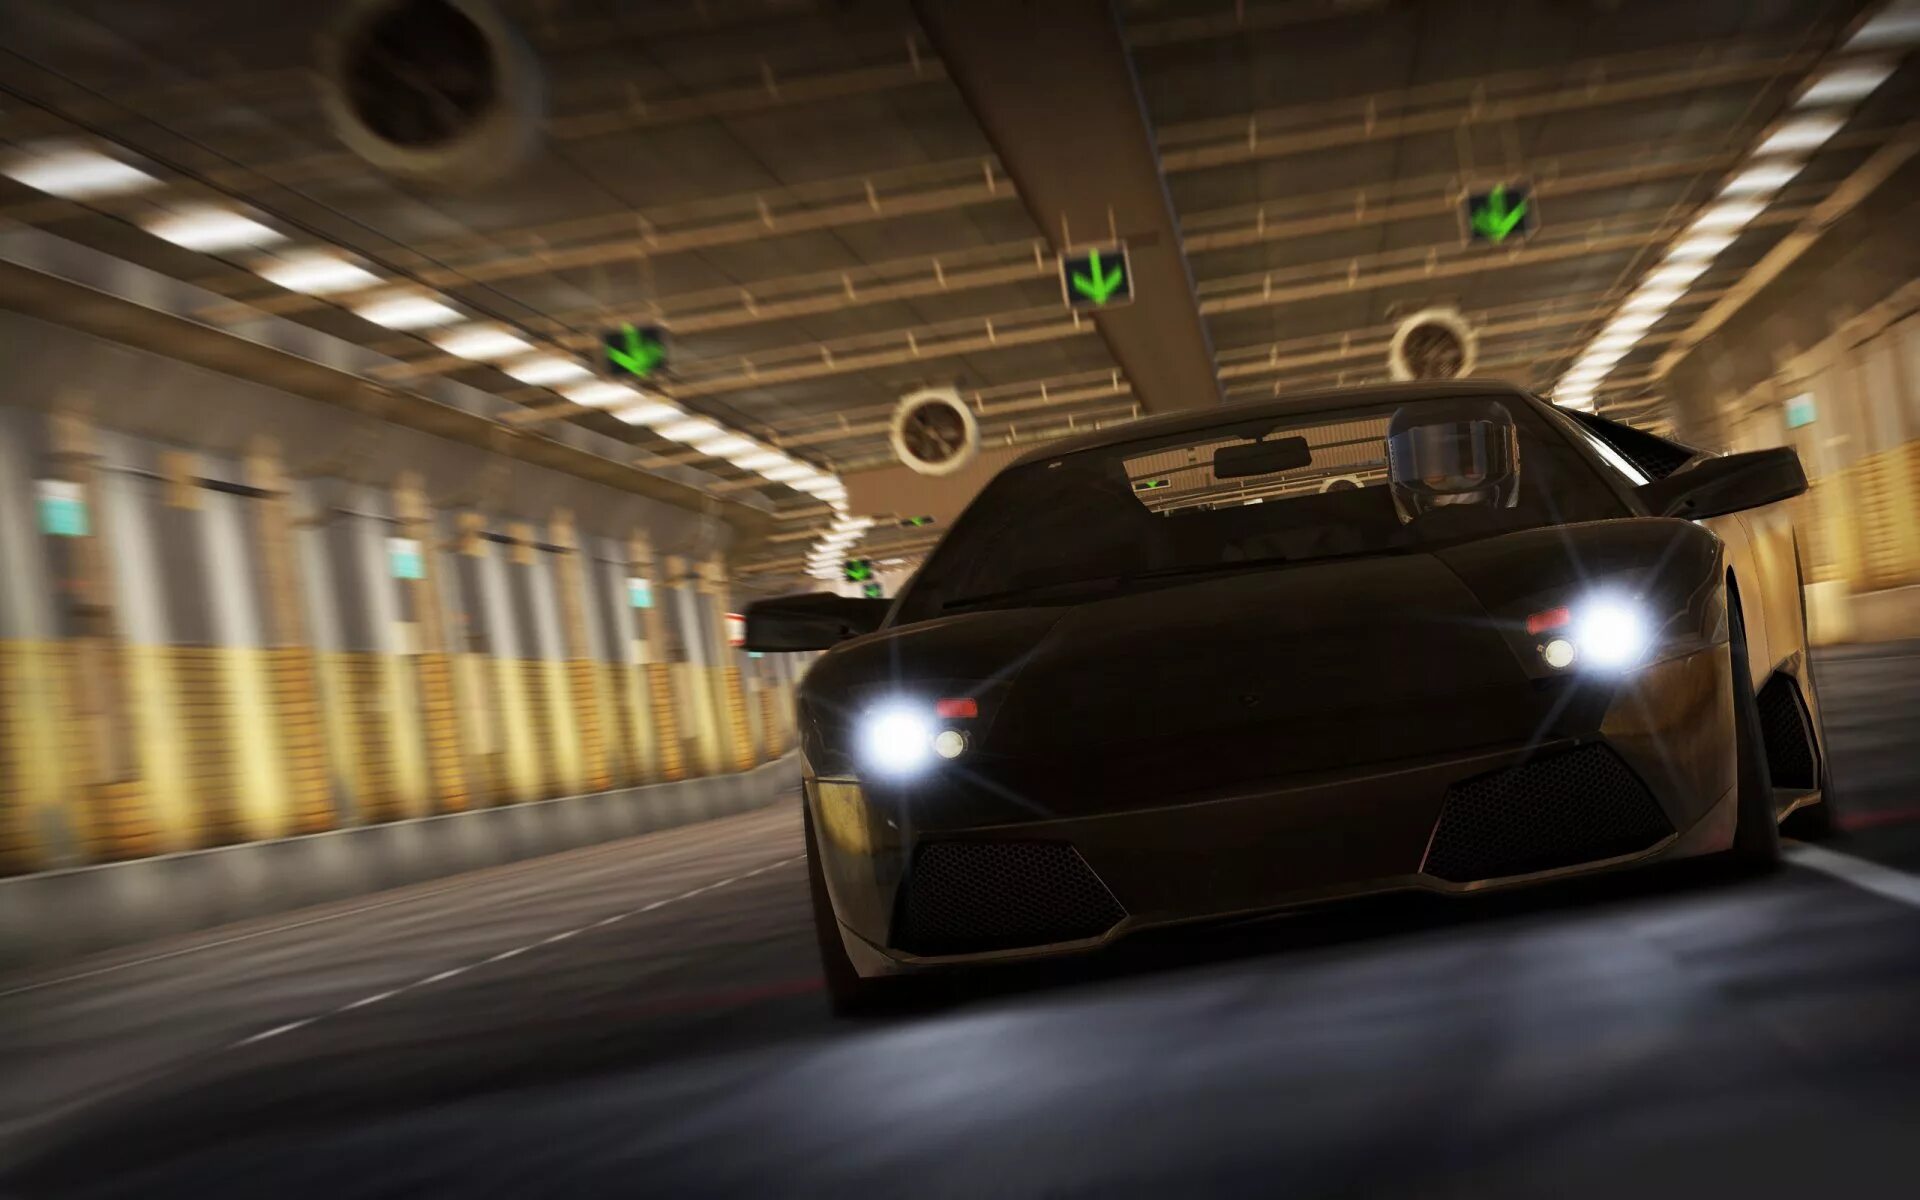 Спид кар. Нфс шифт 2 машины. Lp640 Roadster NFS Shift. Need for Speed Shift 2: unleashed. Shift 2 unleashed авто.